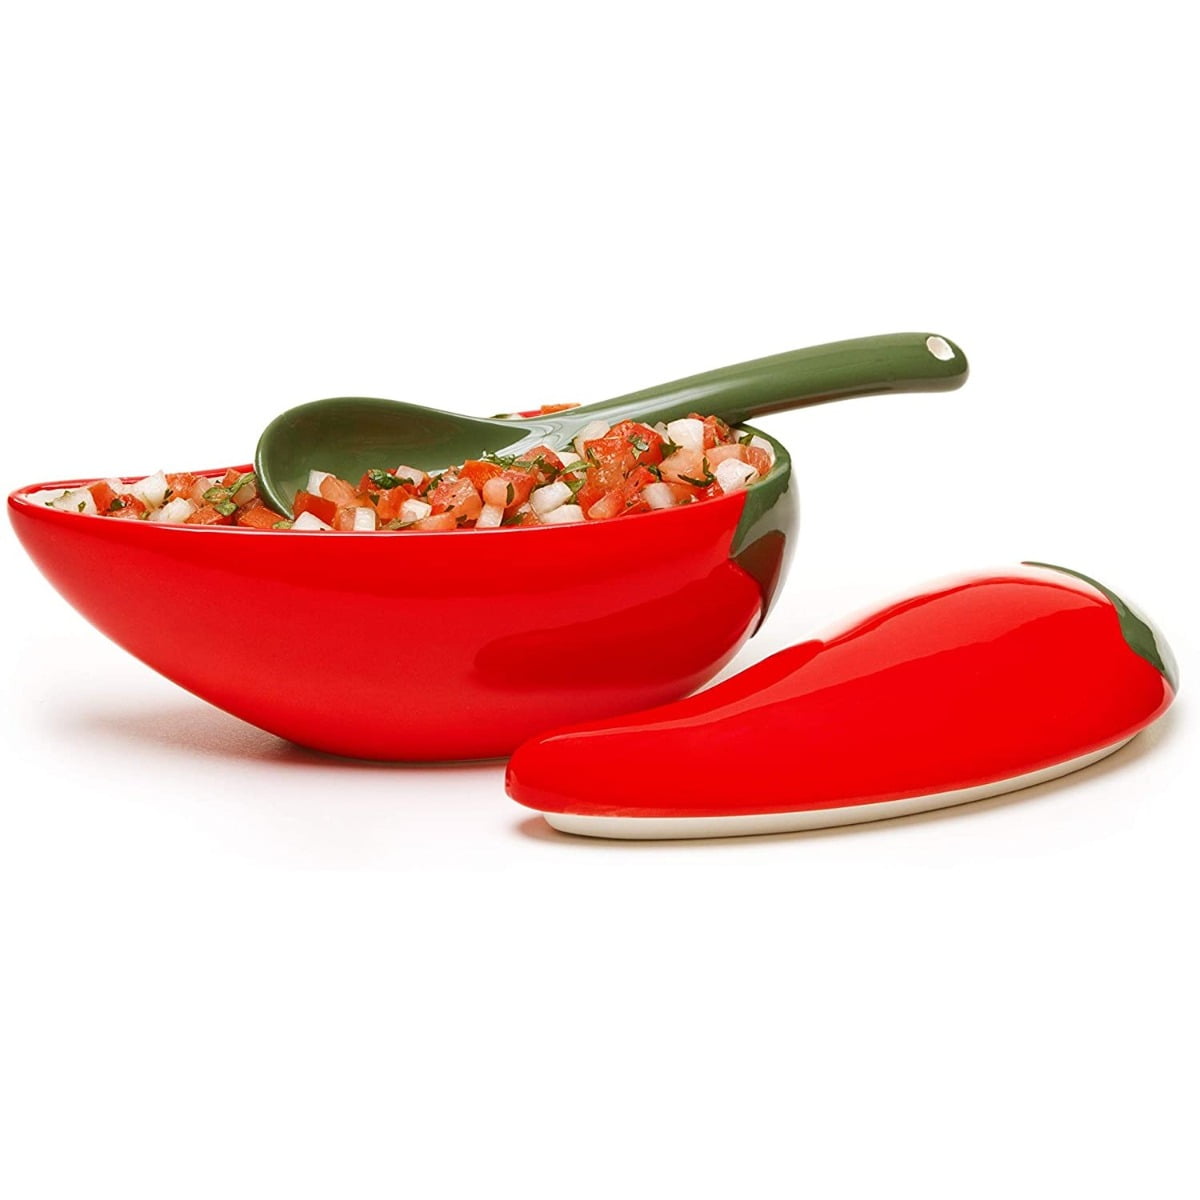 New 17" Large Clay Art Red Chili Pepper Chip Serving Bowl Peppers PLatter 